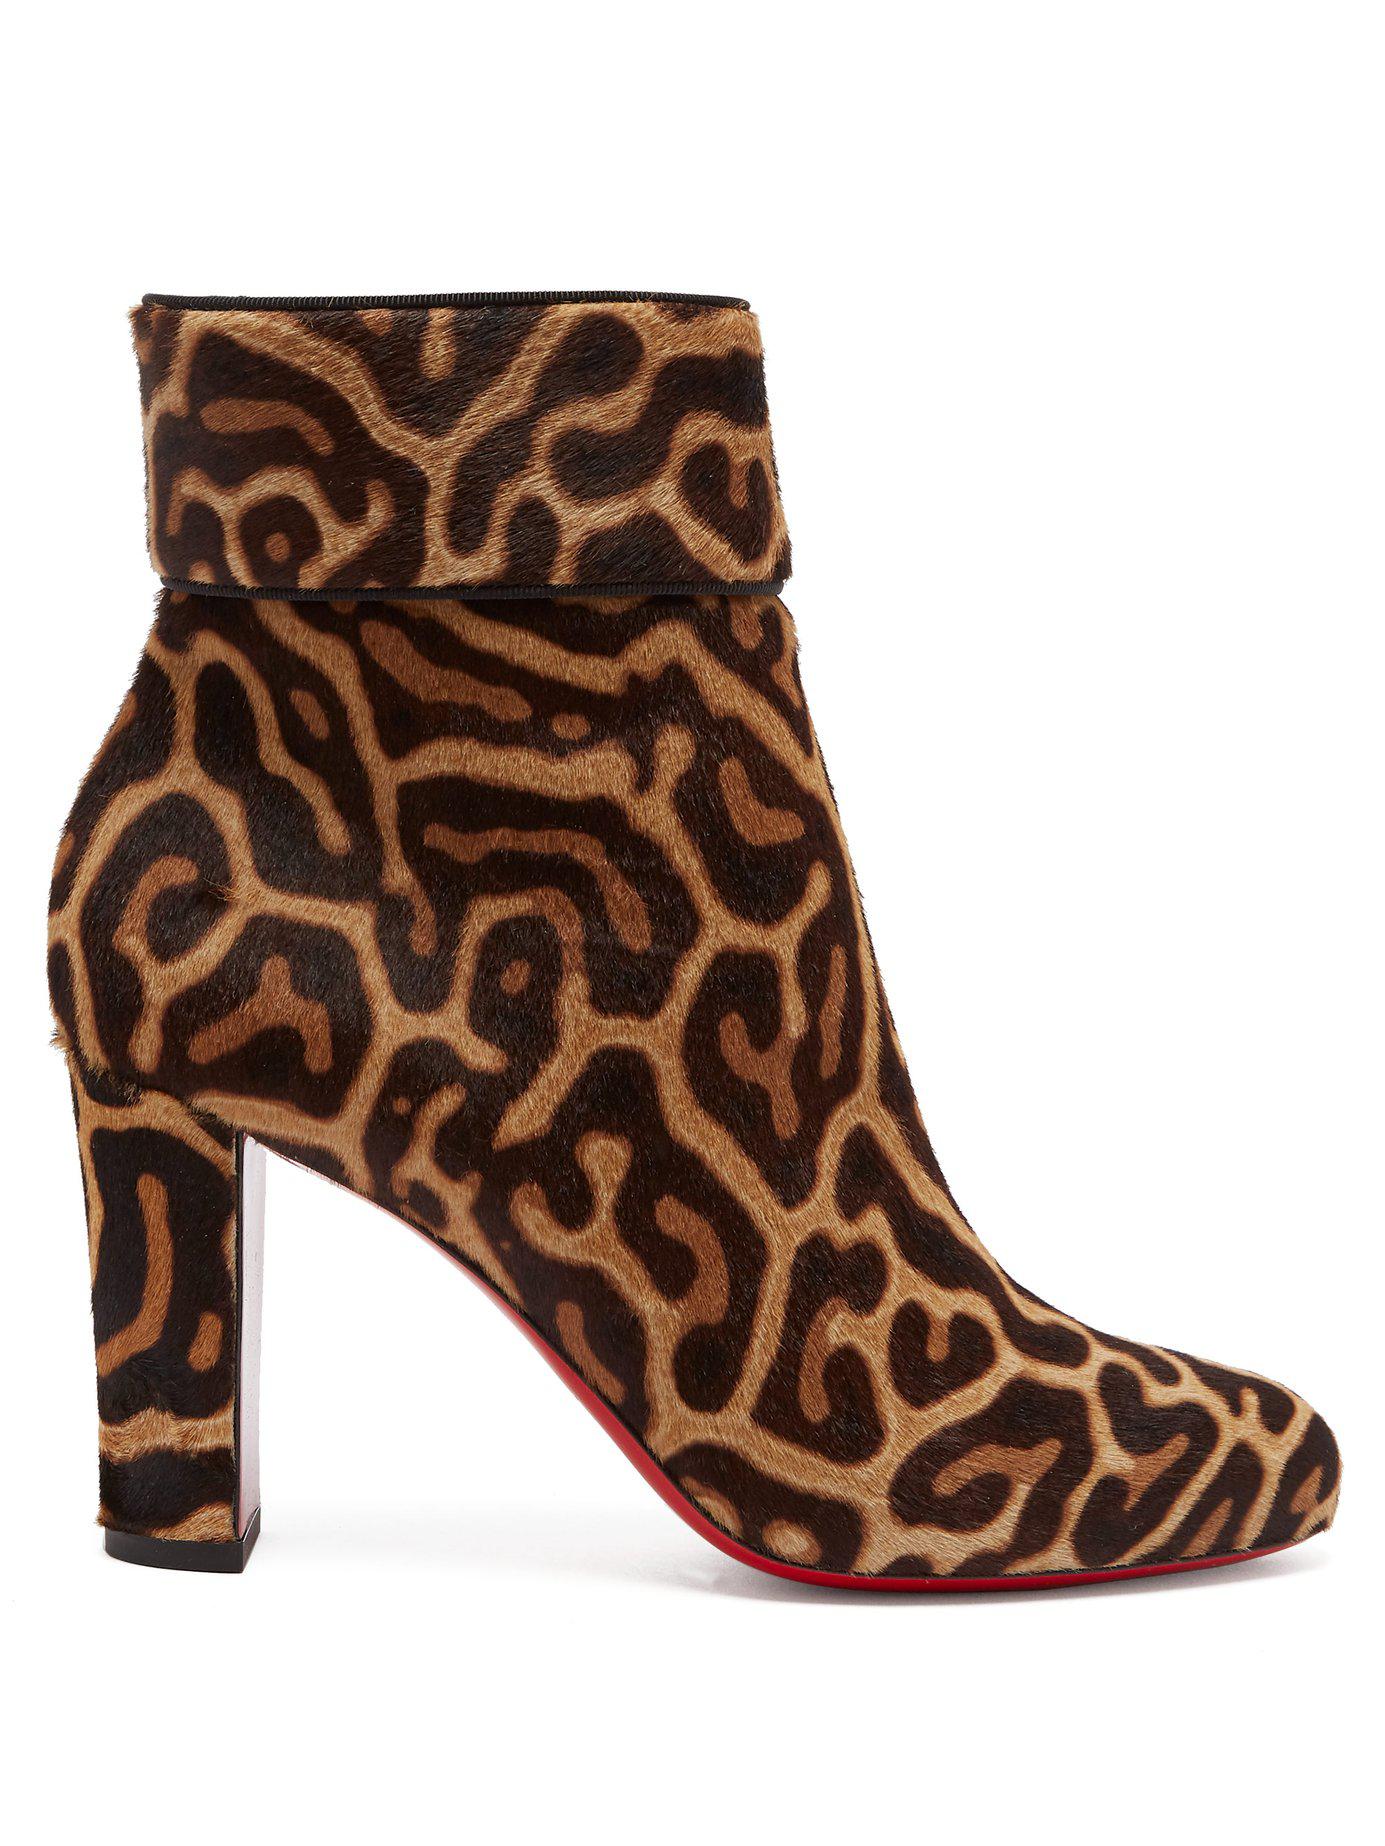 Christian Louboutin Moulamax 85 Leopard Print Pony Hair Ankle Boots in  Brown | Lyst